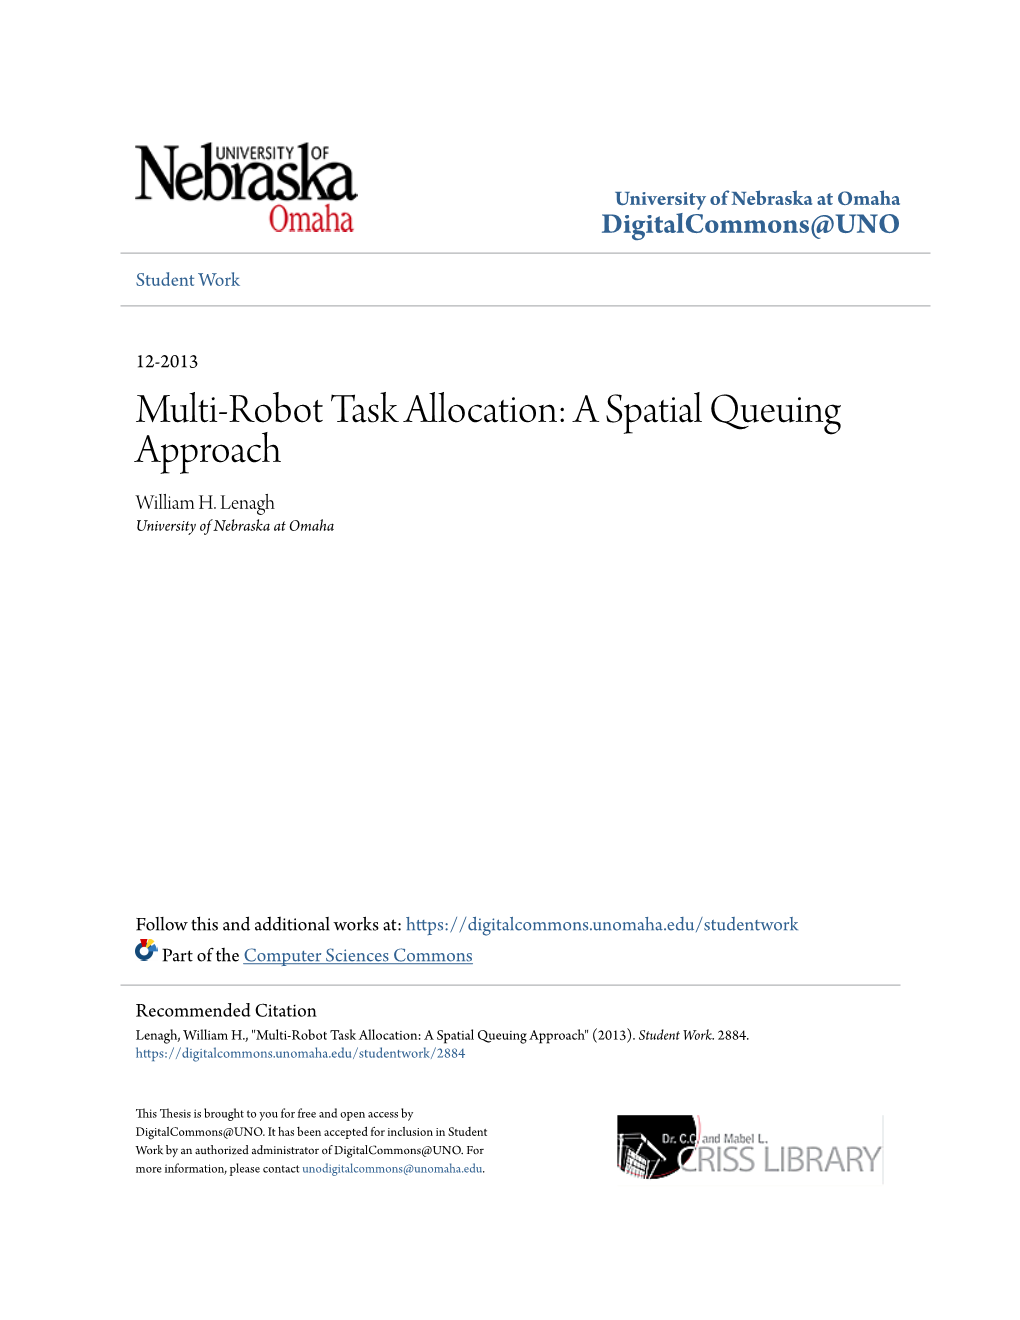 Multi-Robot Task Allocation: a Spatial Queuing Approach William H